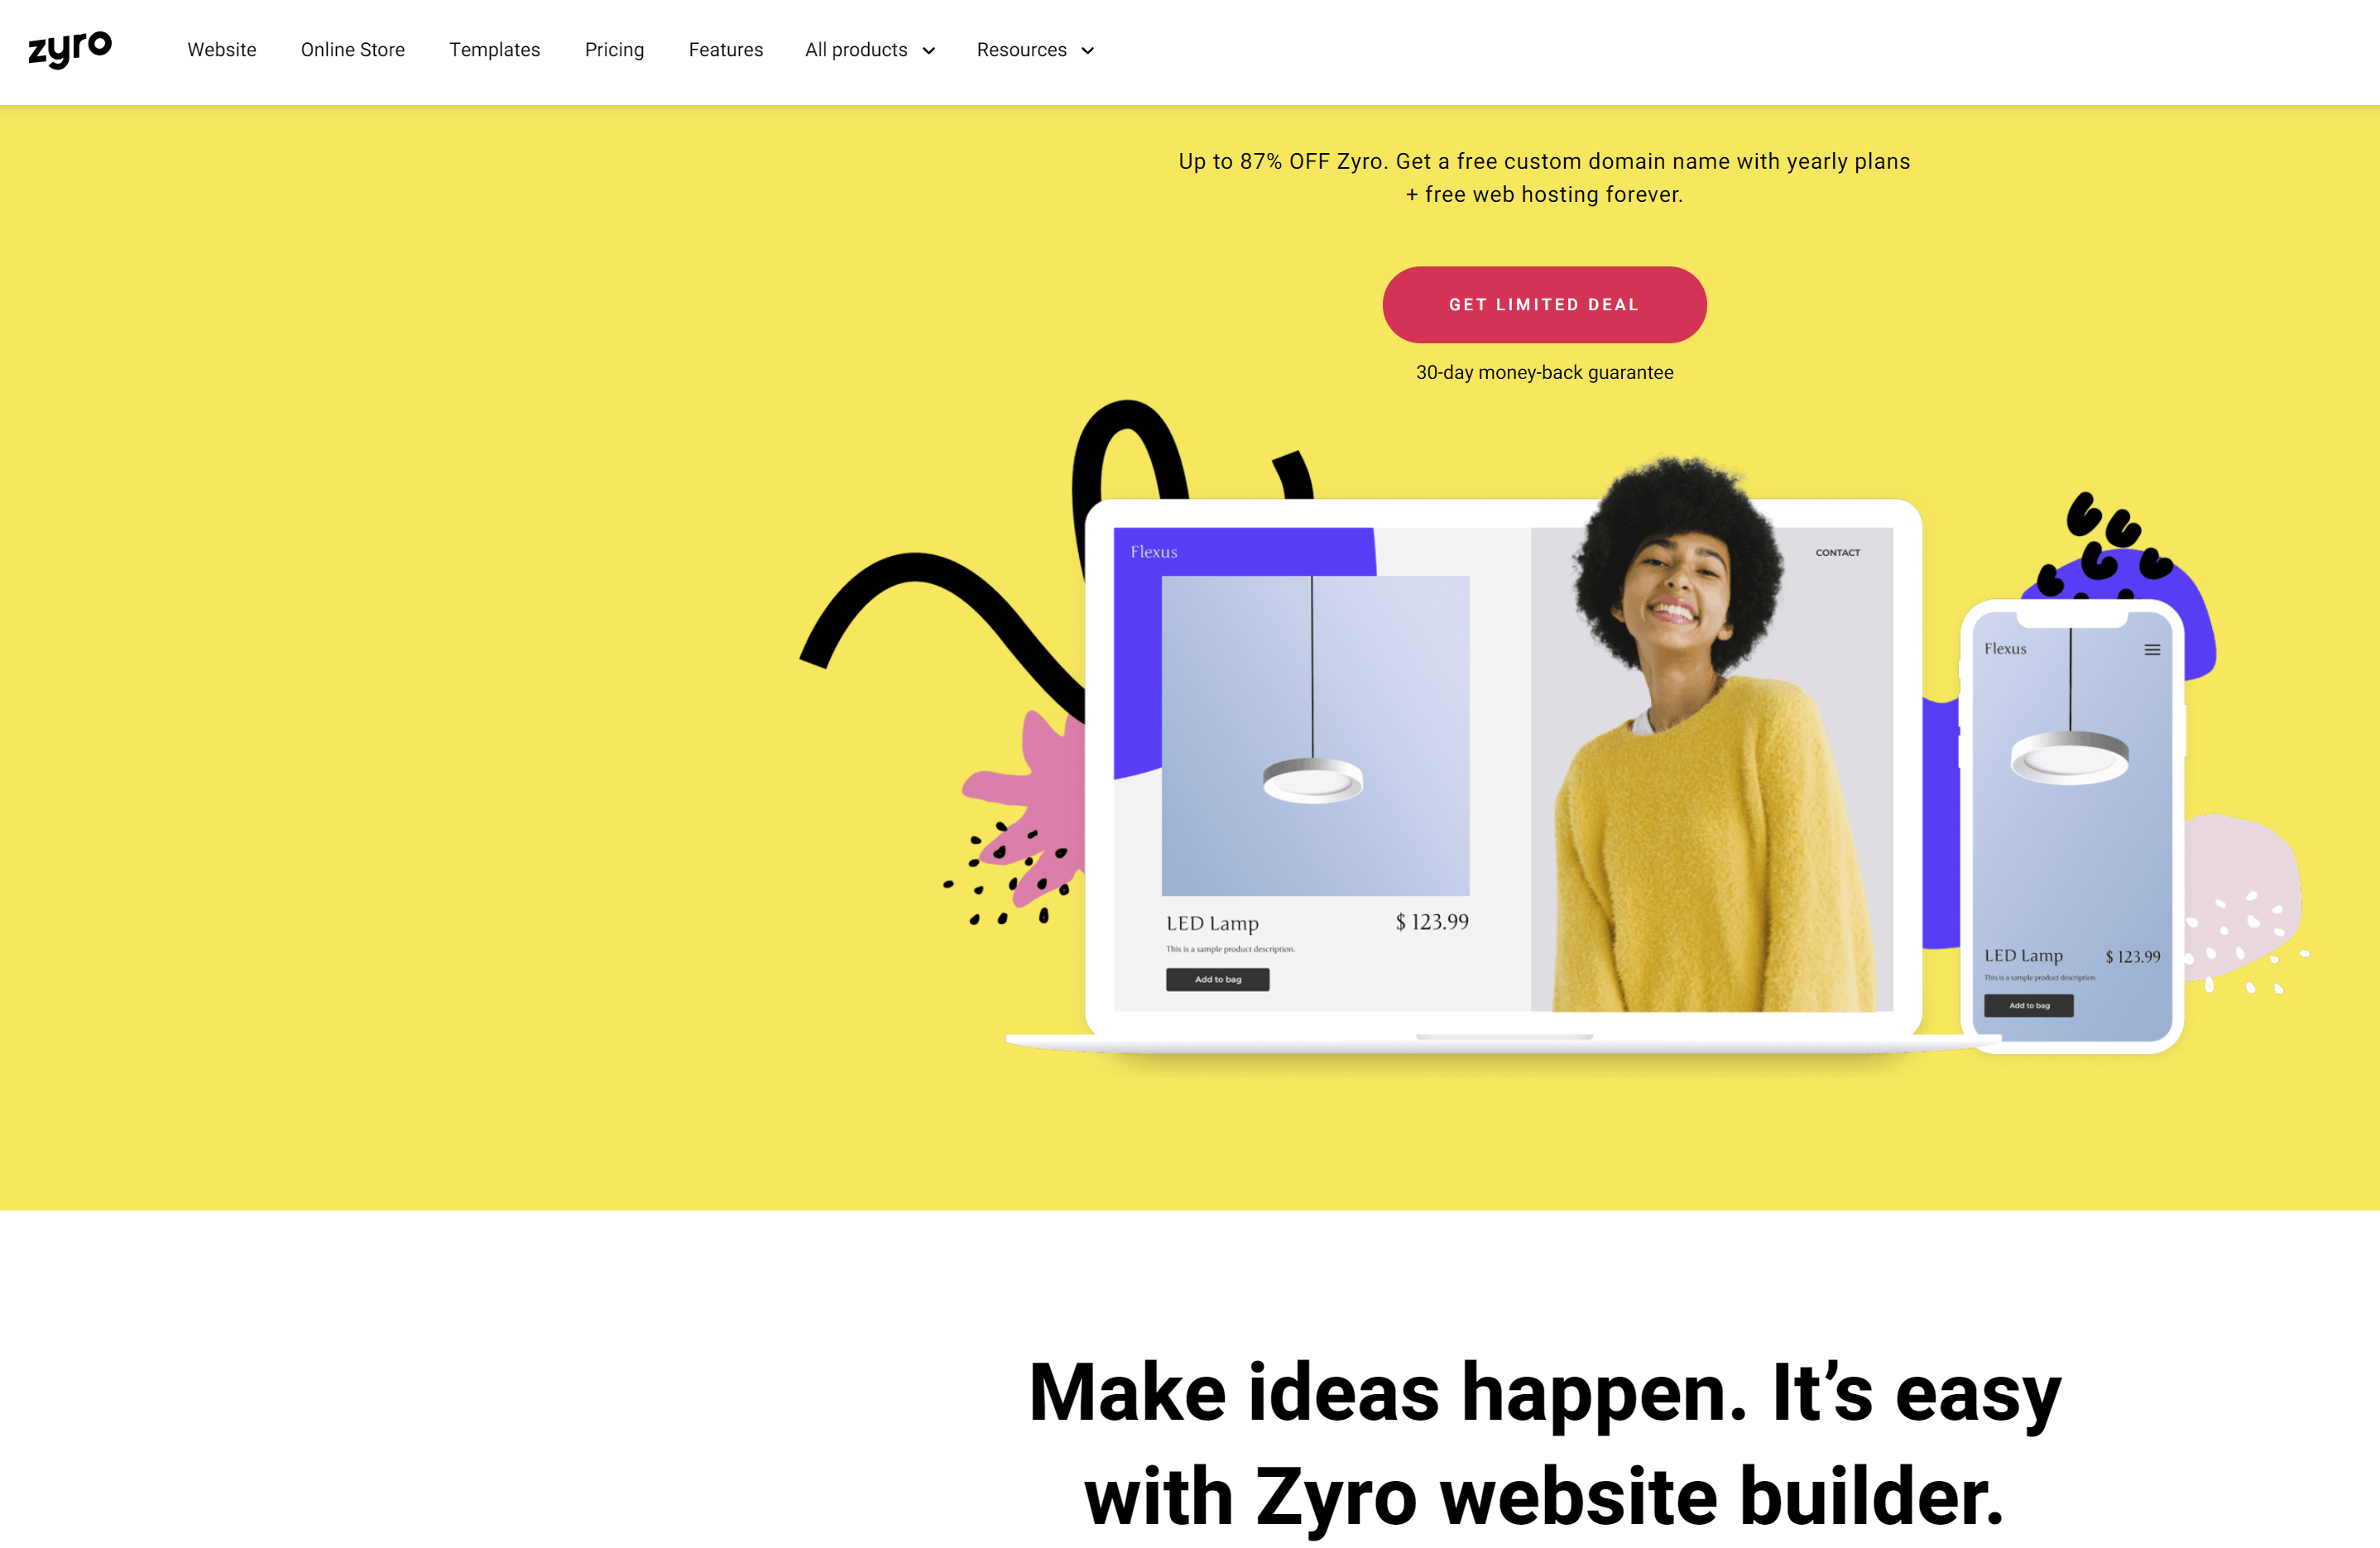 Zyro Review: How Easy and Fast Is It to Build a Website?